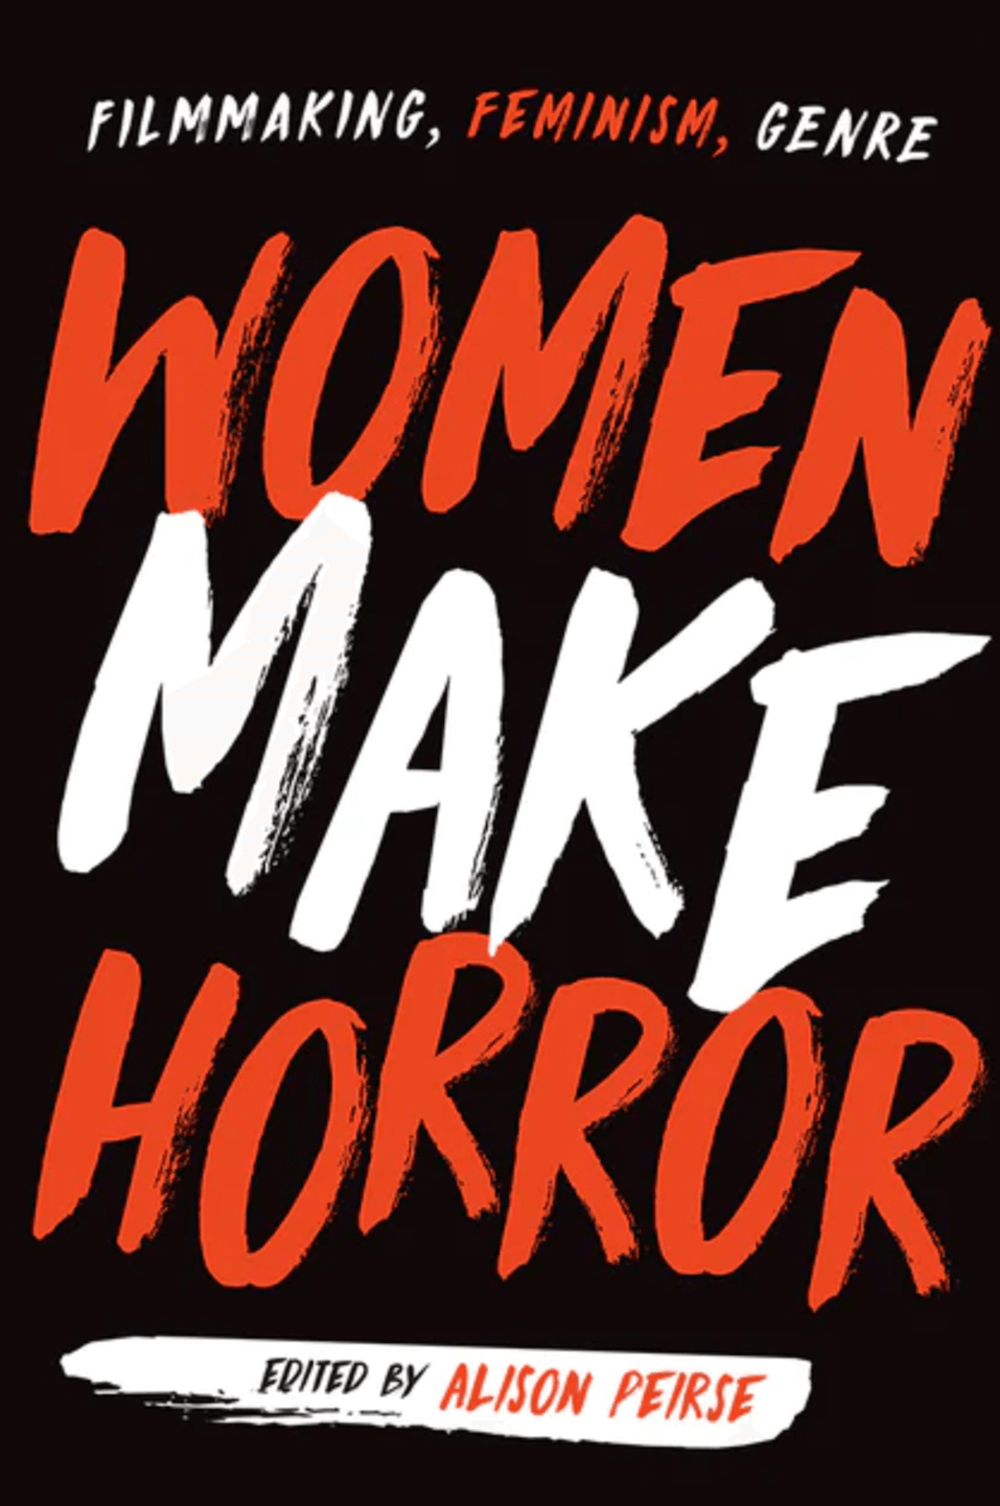 A book cover for 'Women Make Horror' with the title in red and white text